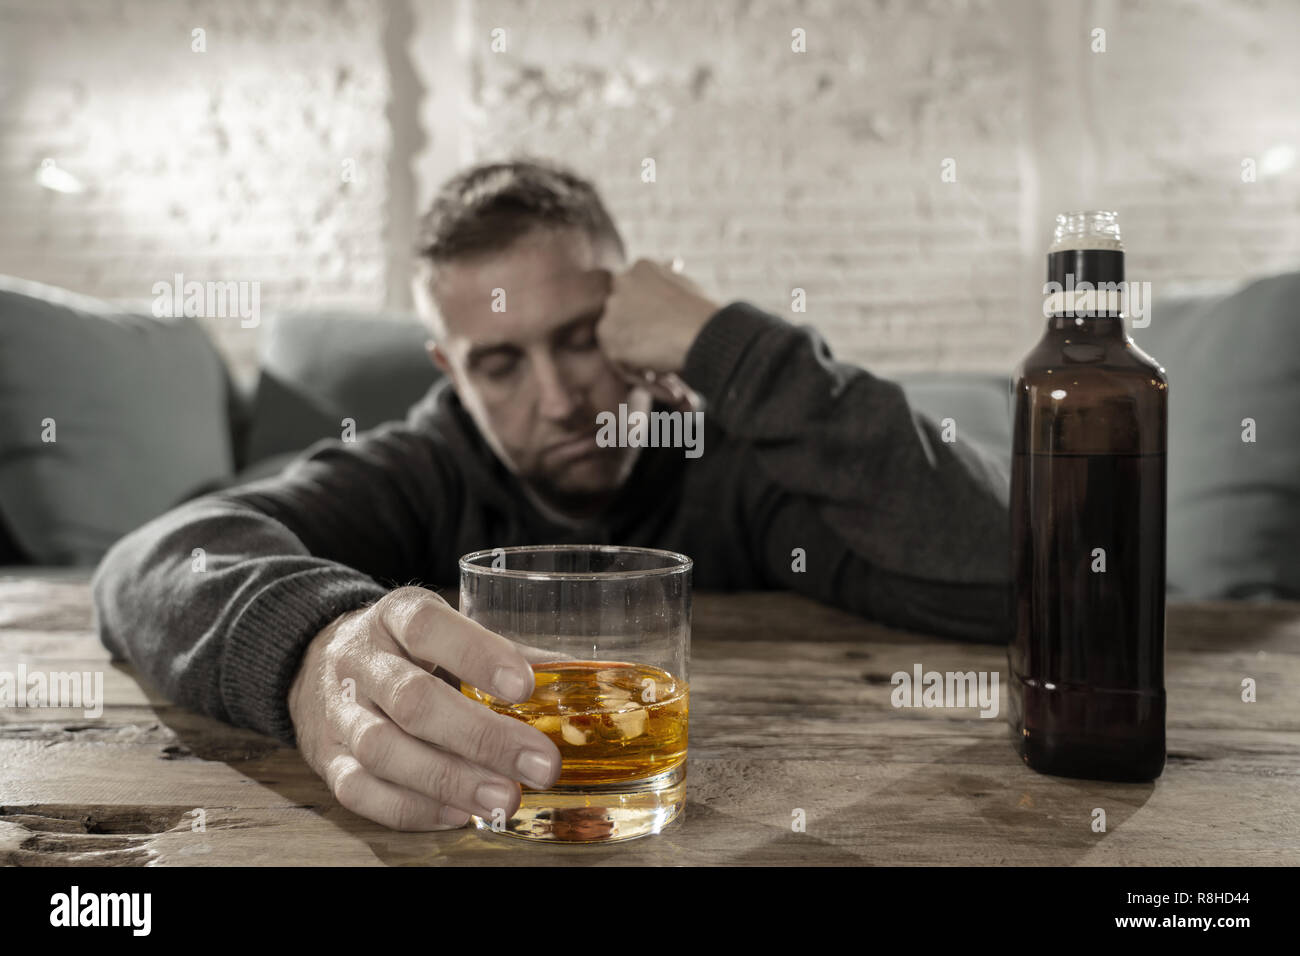 Drunk young man drinking alcohol at home felling lonely depressed and sick holding a glass of whiskey image in white and black and drink in color in A Stock Photo